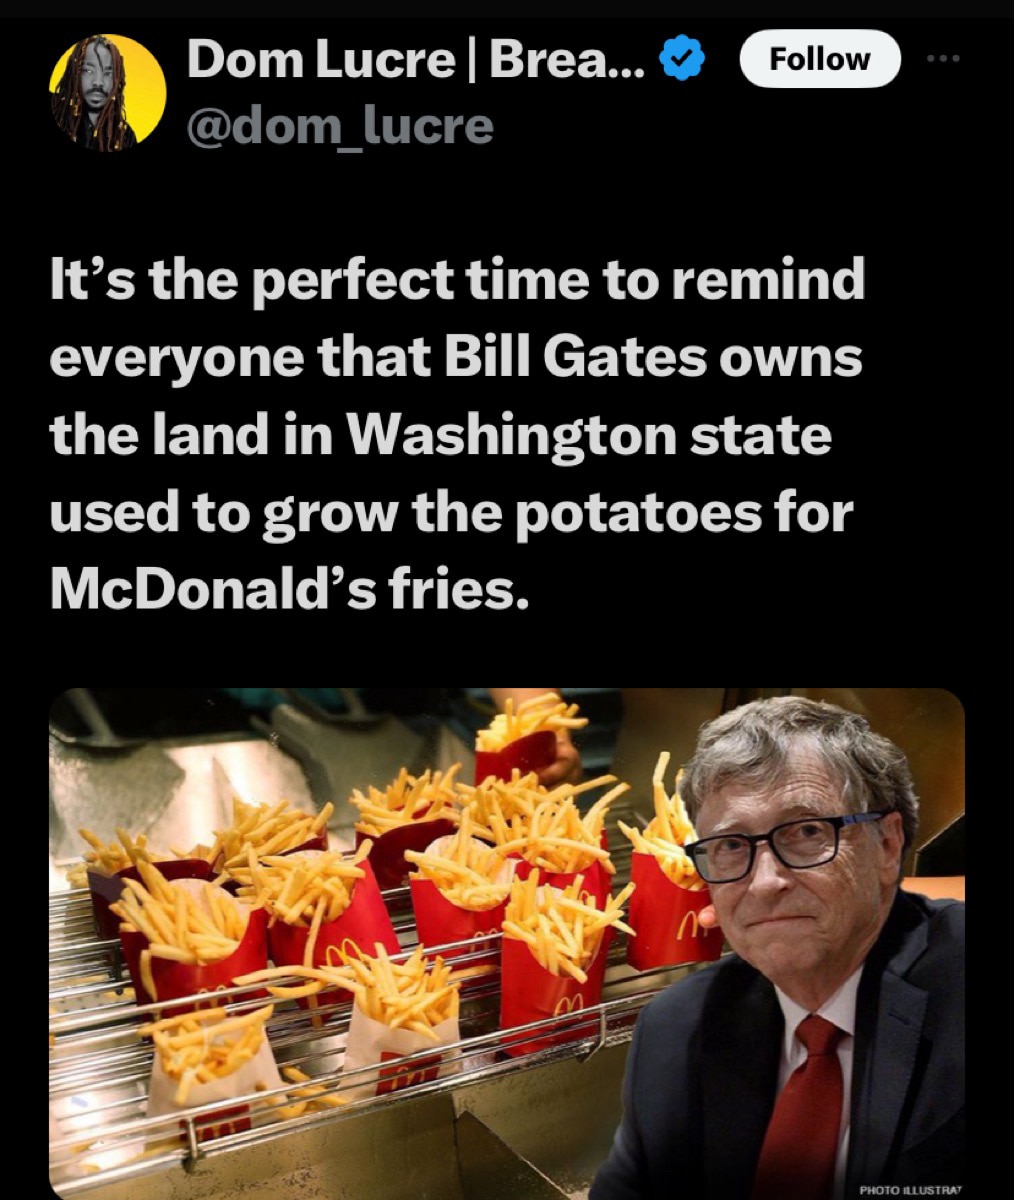 Did you know that Bill Gates owns farmland in Washington state used to grow potatoes for McDonald's fries? Not that I am suggesting anything. 🤔